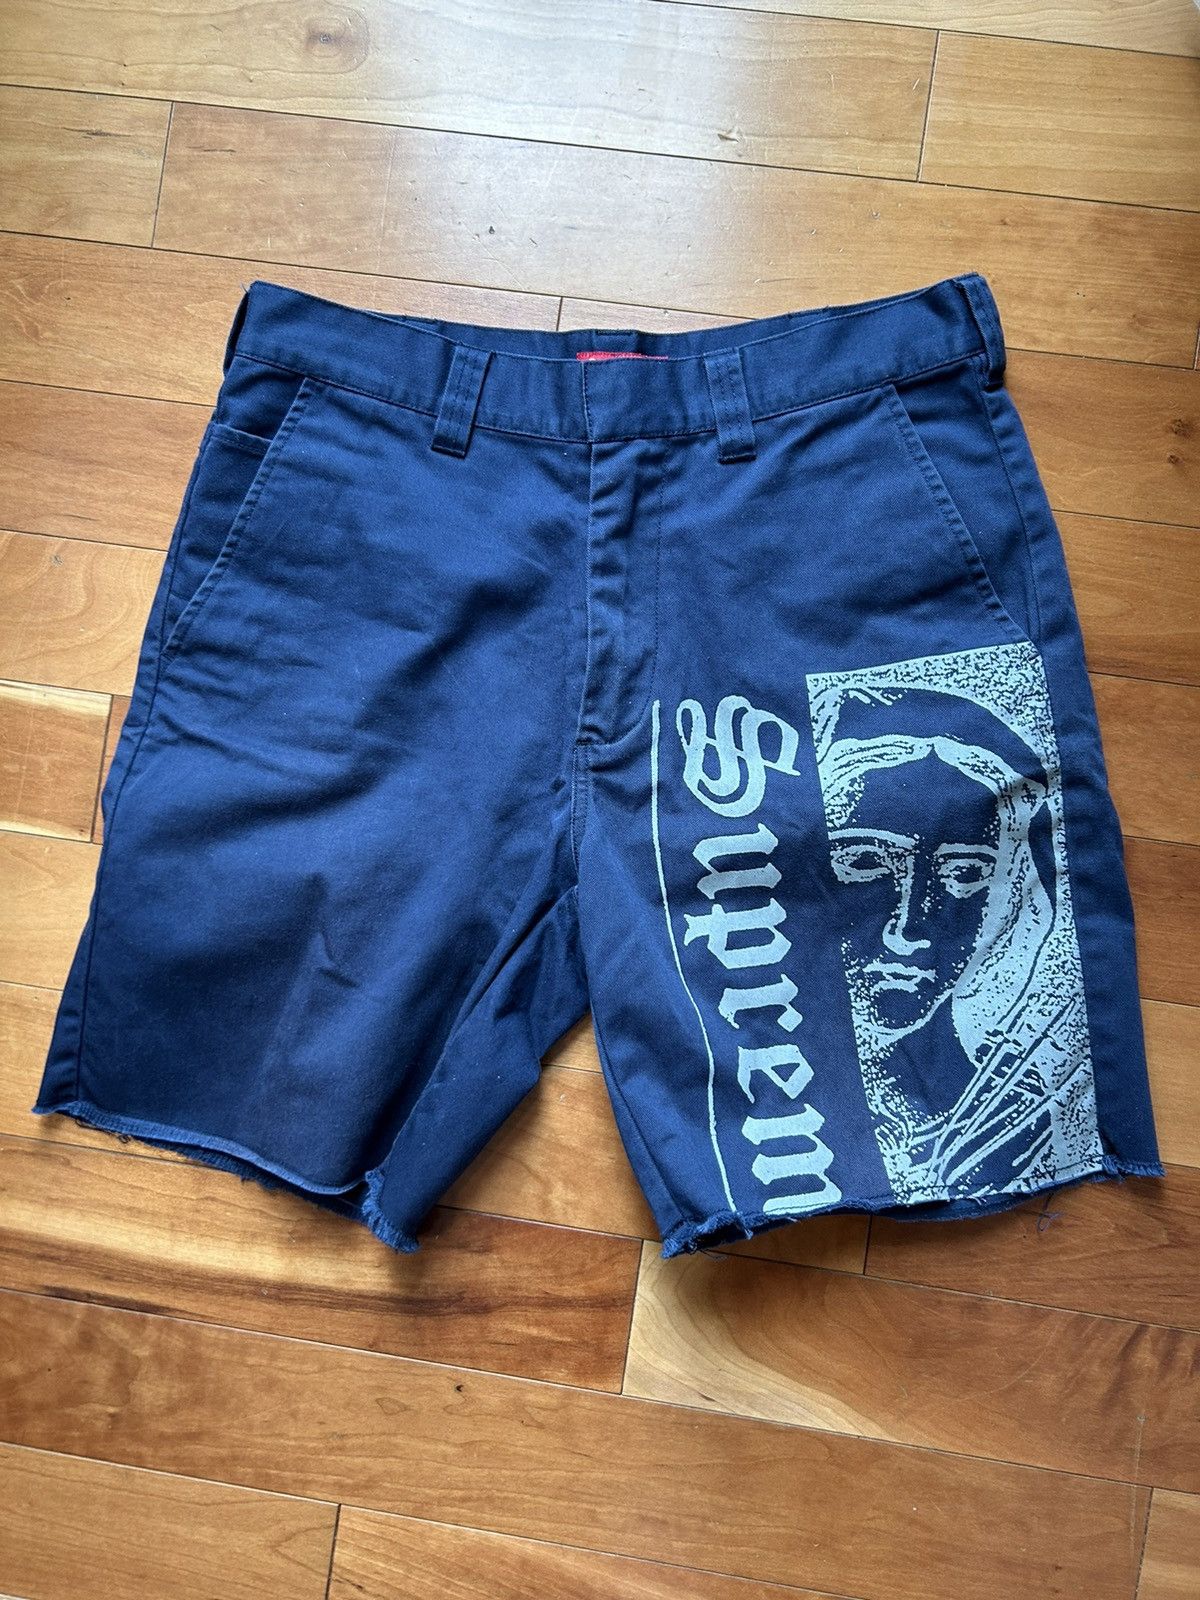 Supreme Mary Work Shorts | Grailed